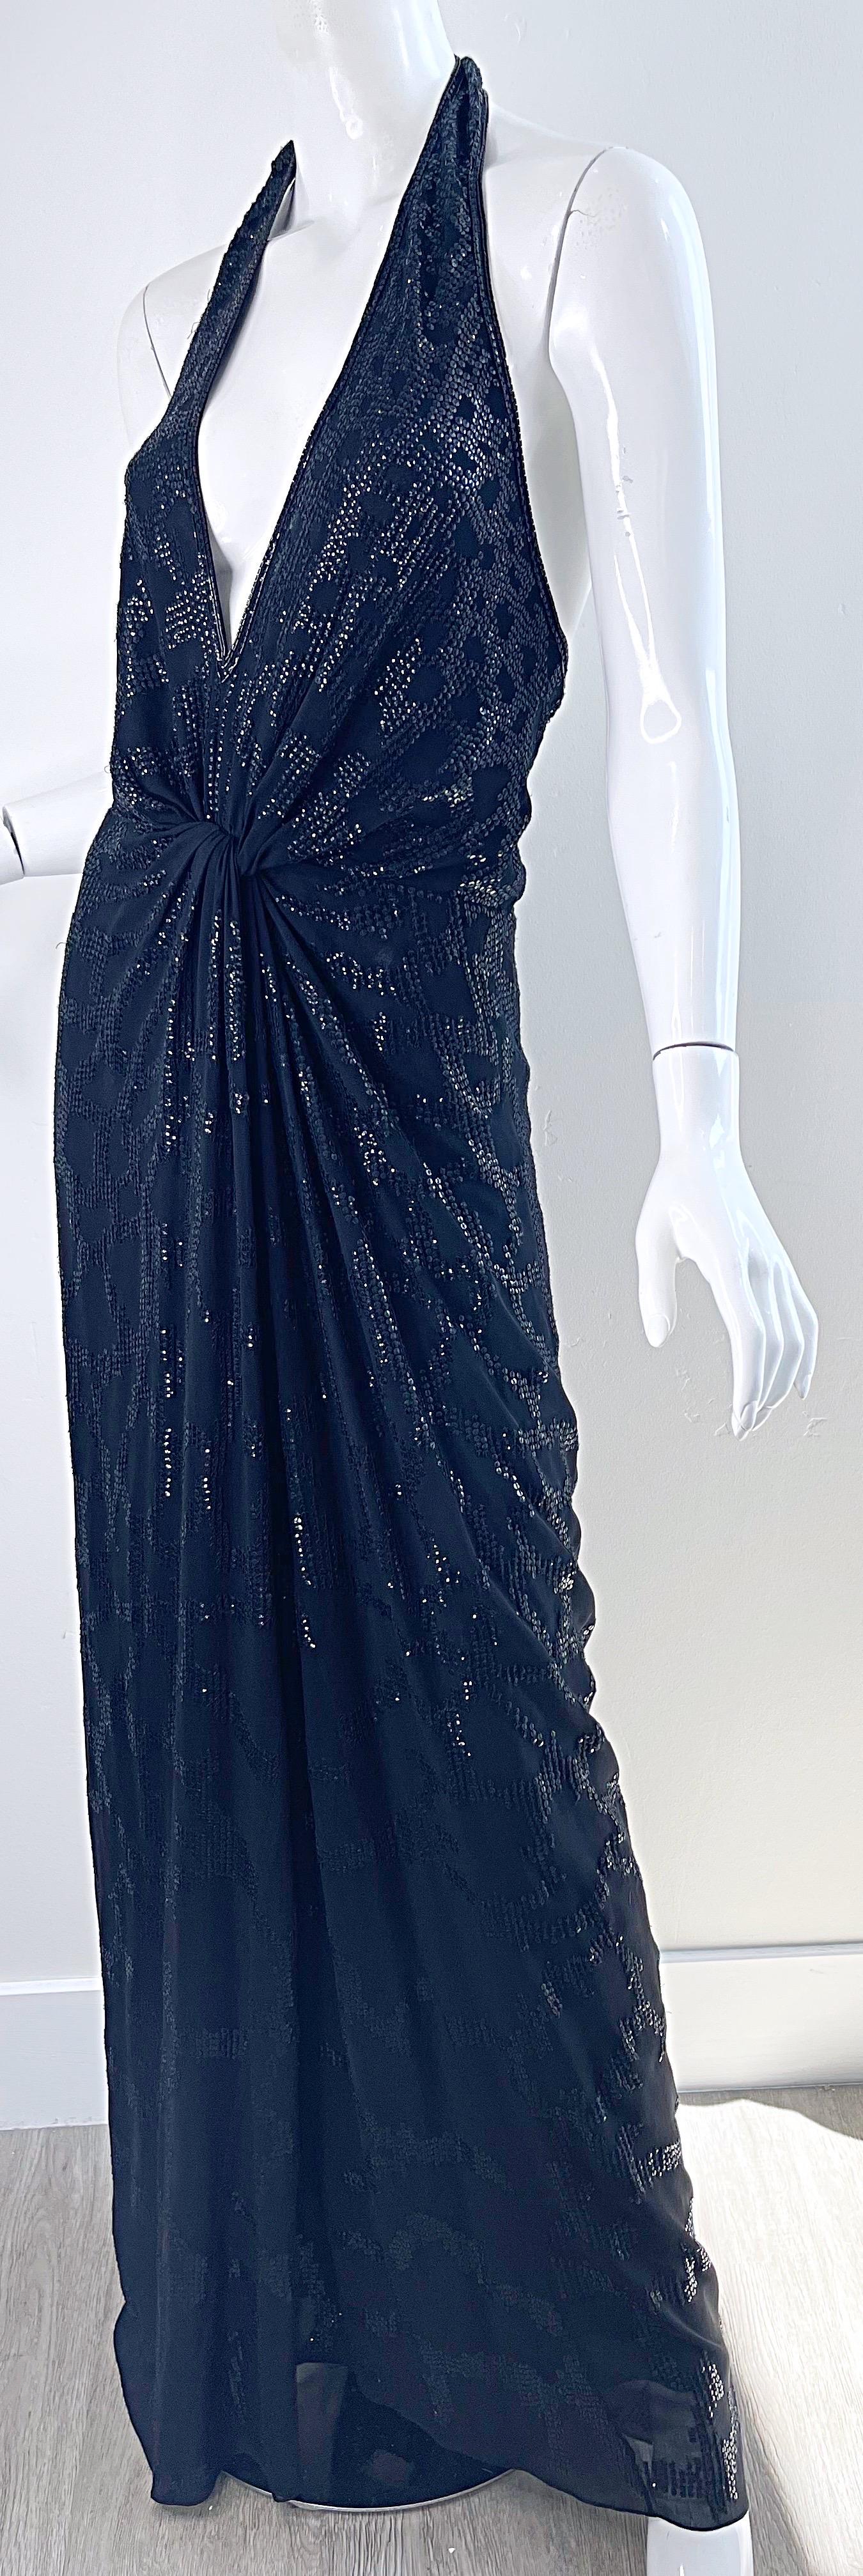 Roberto Cavalli Runway Fall 2006 Sequin Black Silk Chiffon Size 44 Plunging Gown For Sale 4